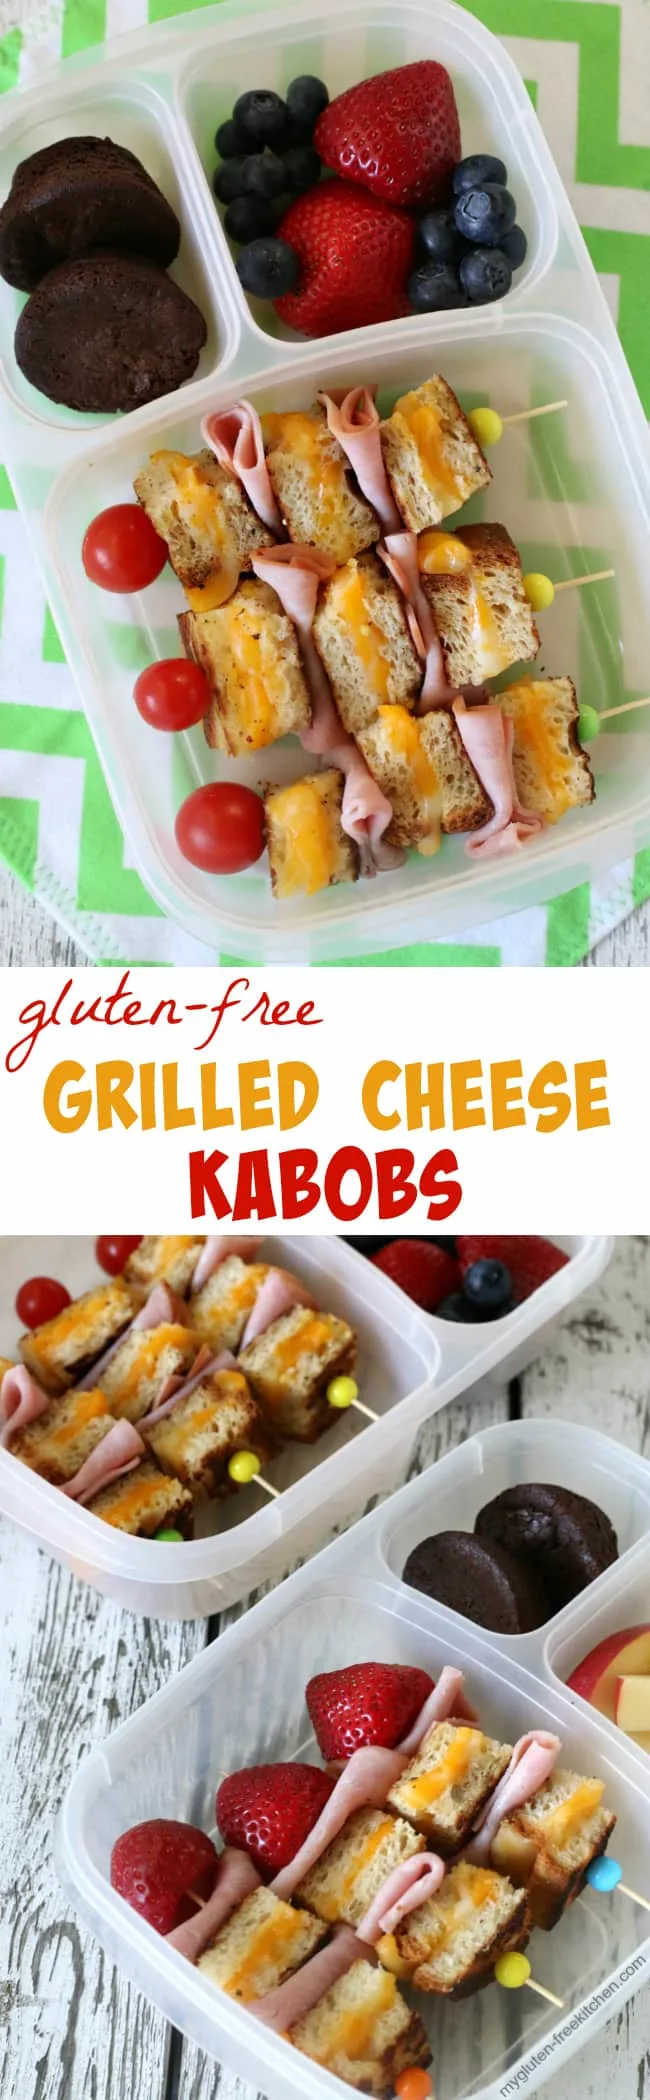 Gluten-free Grilled Cheese Kabobs for school lunches. My tween and teen loved these!